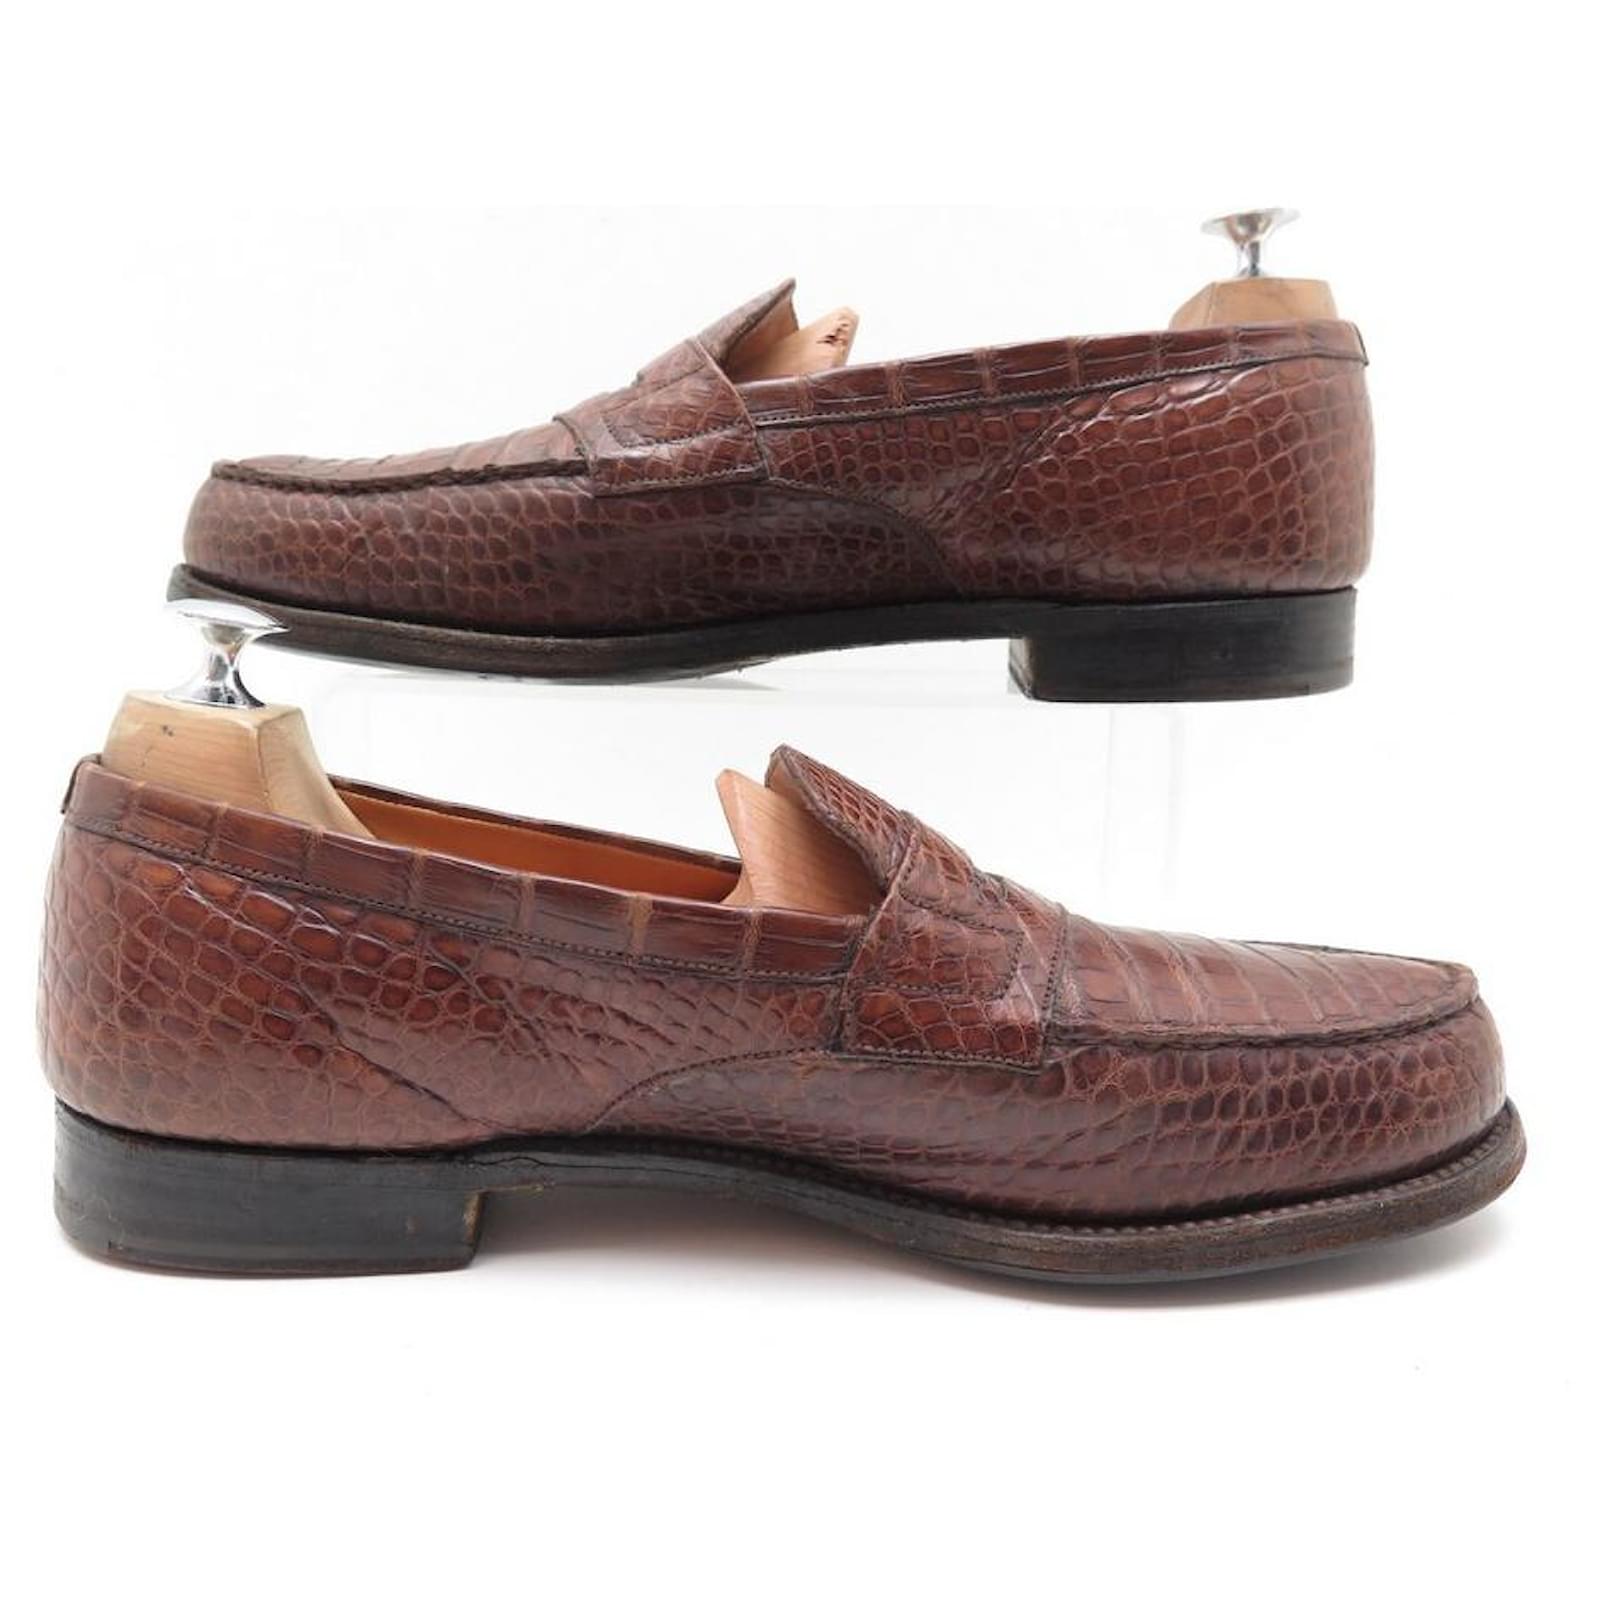 JM WESTON LOAFERS 180 9C 43 BROWN CROCODILE LEATHER SHOES Exotic ...